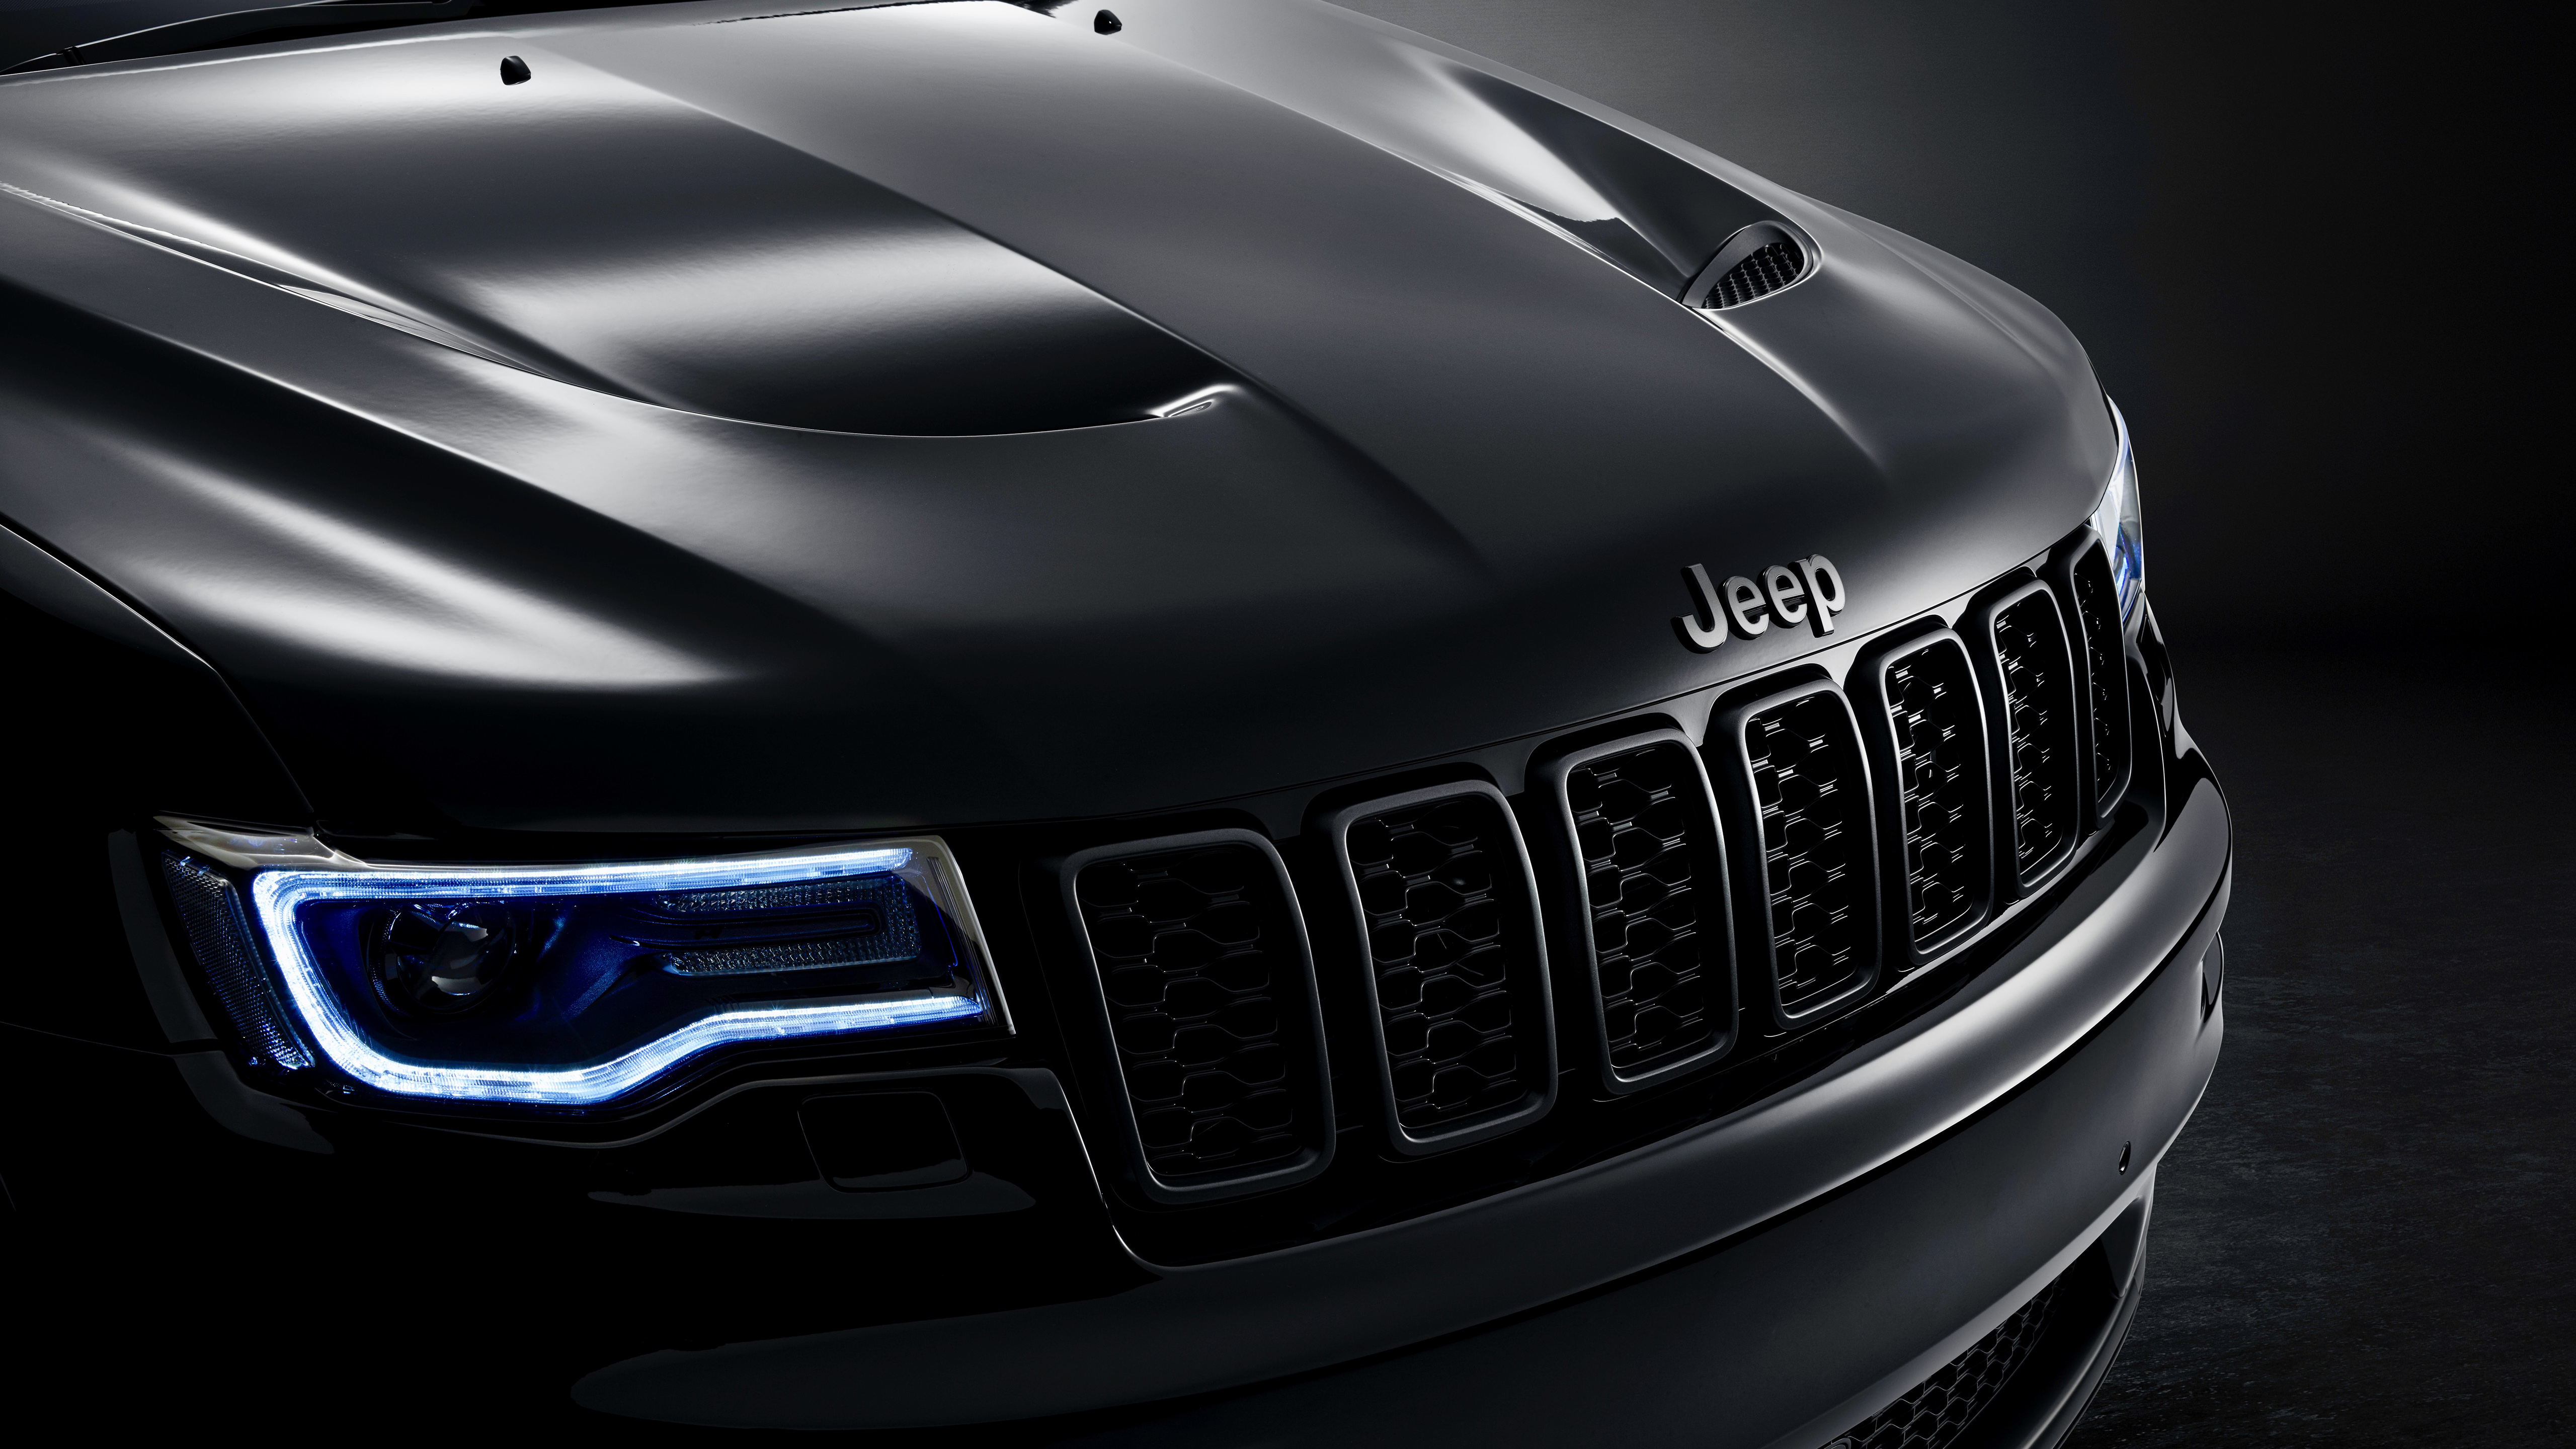 Jeep Grand Cherokee S Limited 2019 5K 2 Wallpaper HD Car Wallpapers 